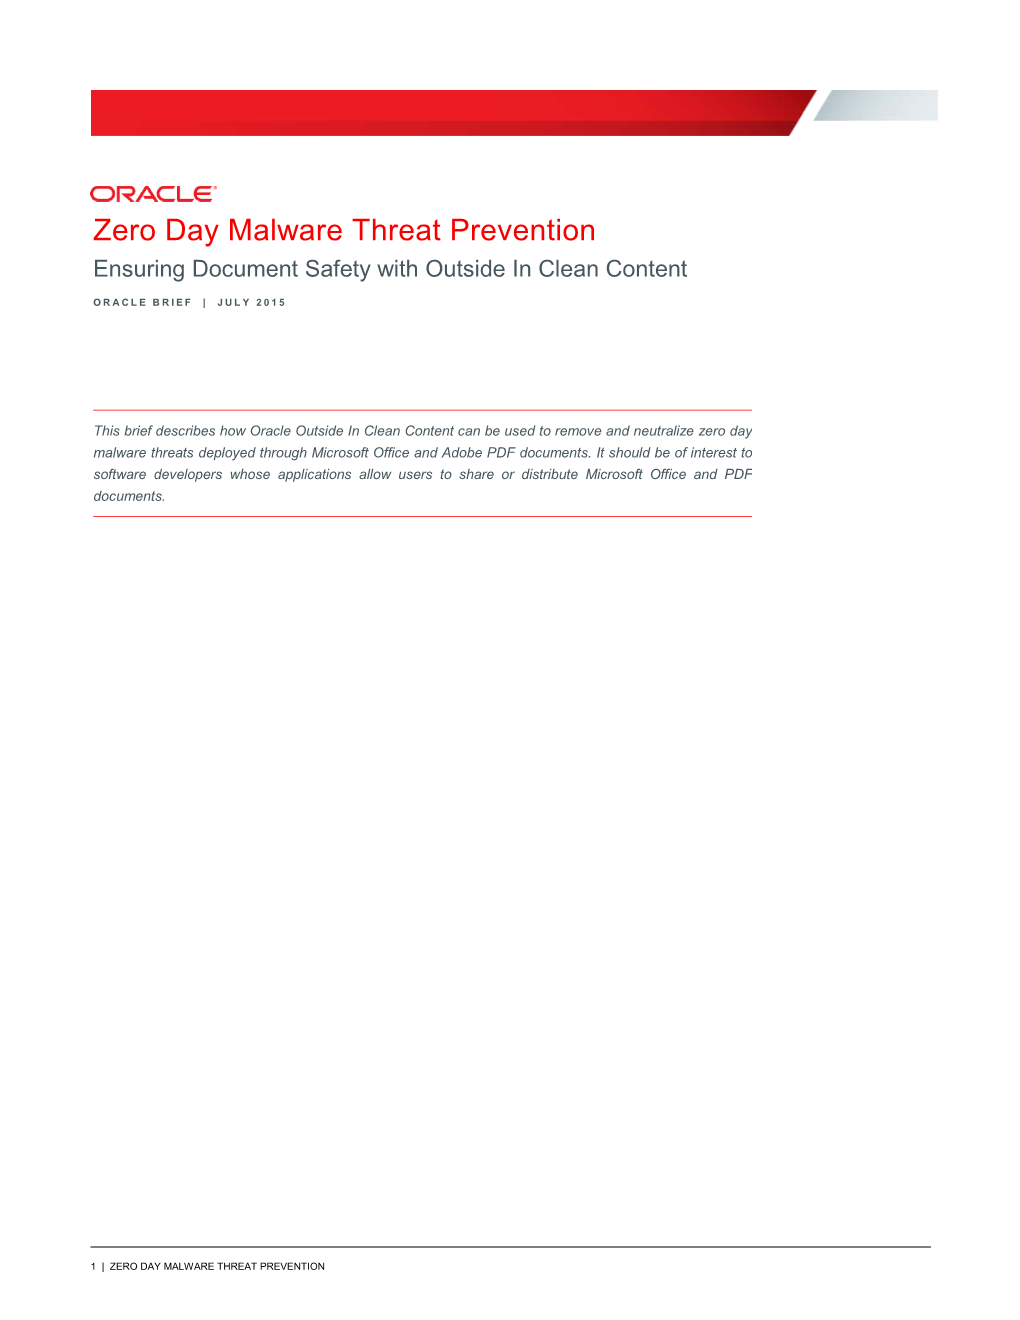 Zero Day Malware Threat Prevention with Clean Content